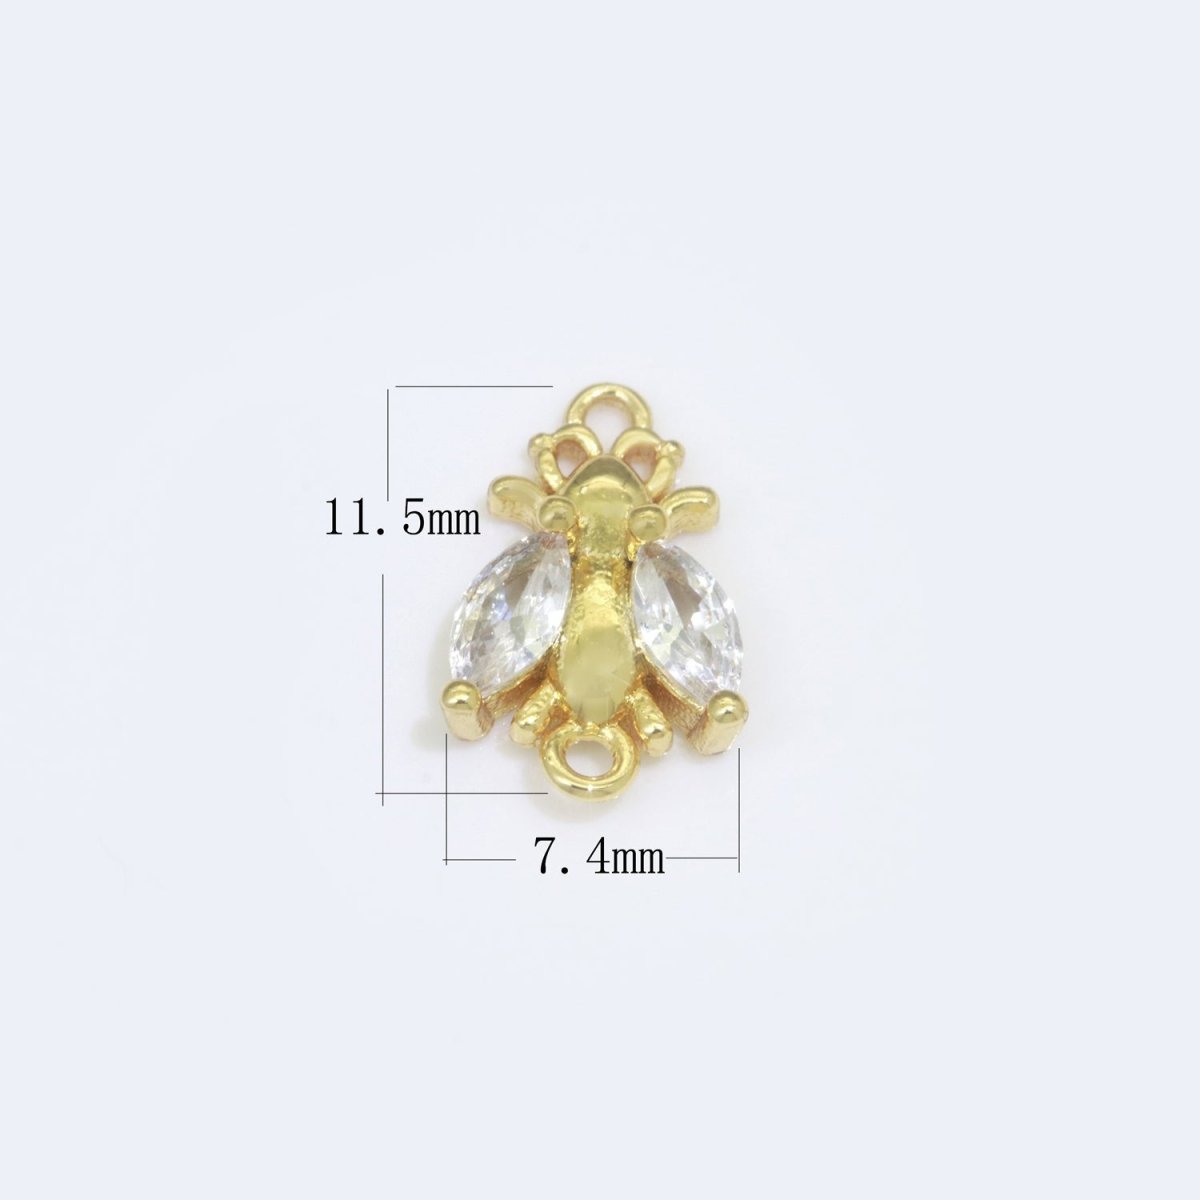 CZ Fly Pendant, Gold Plated Housefly Charm Connector DIY Insect Jewelry Making Supplies F-909 F-910 - DLUXCA